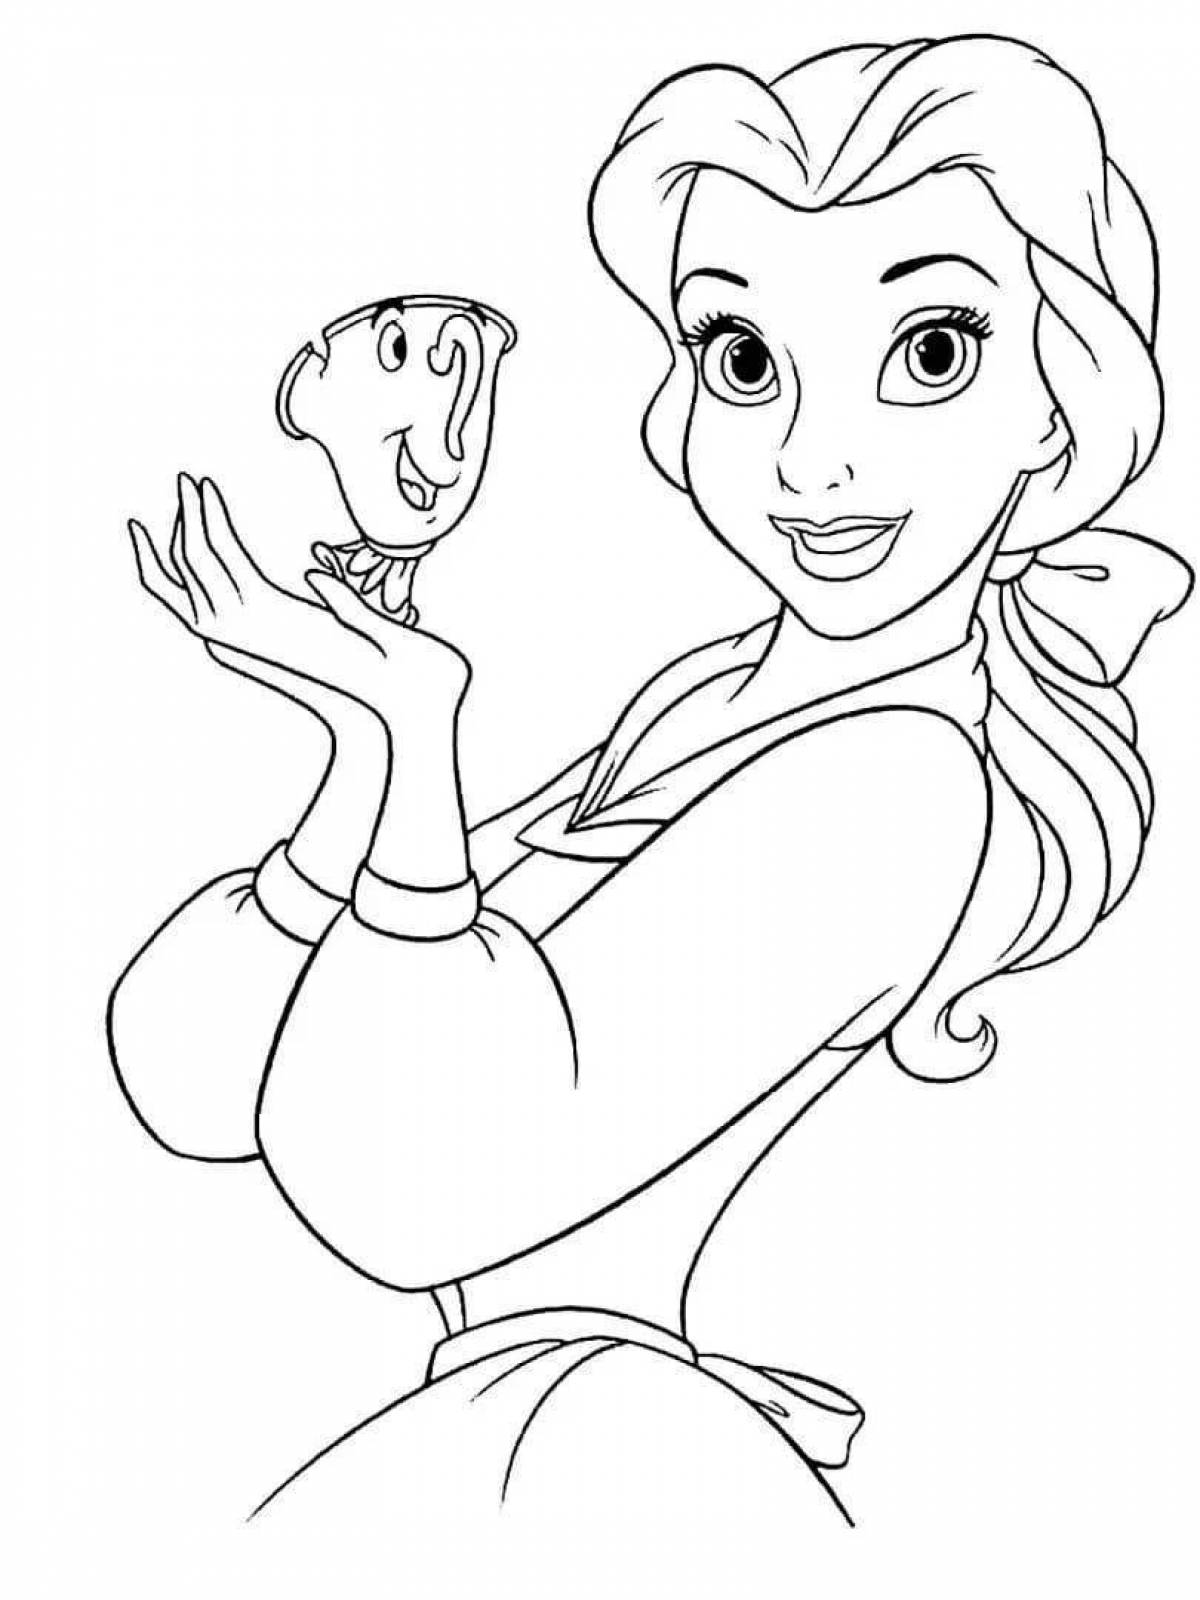 Charming belle coloring page